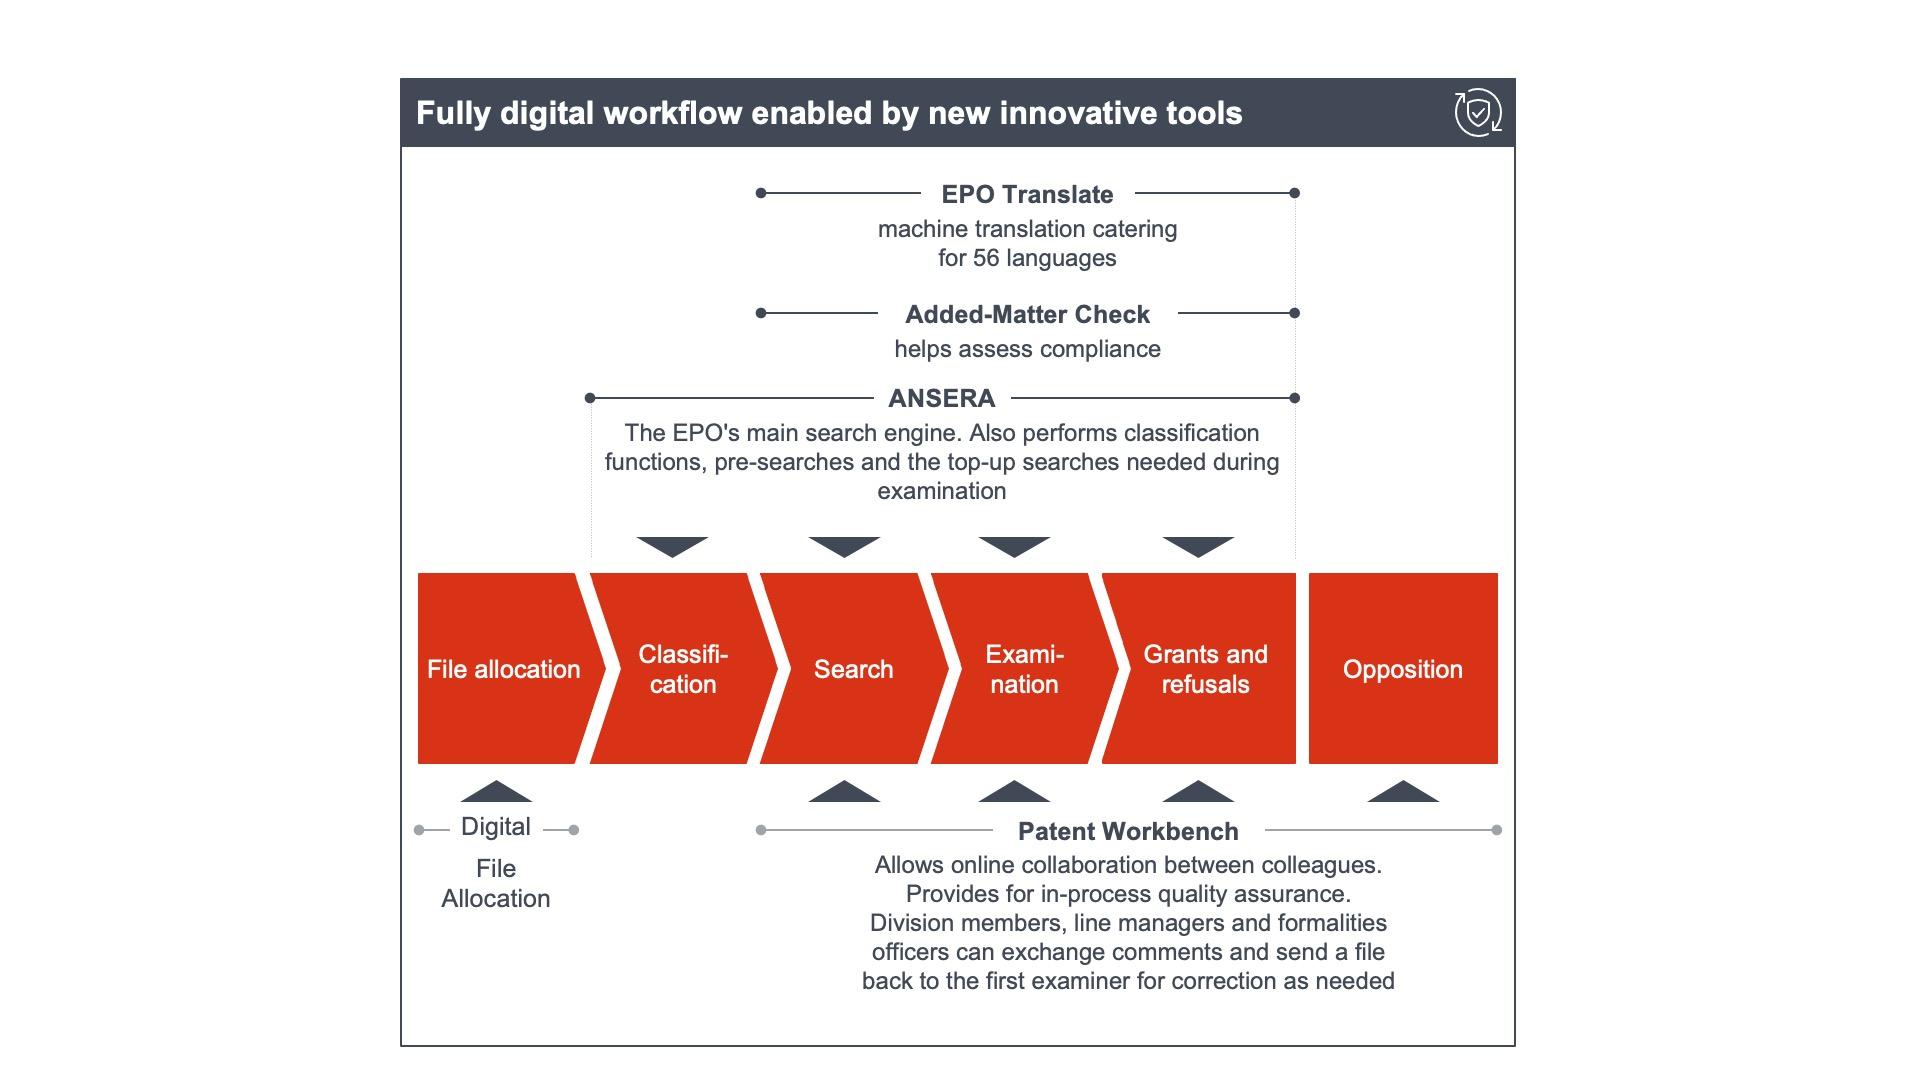 The EPO's fully digital workflow is enabled by new innovative tools such as EPO Translate, ANSERA, Digital File Allocation and Patent Workbench